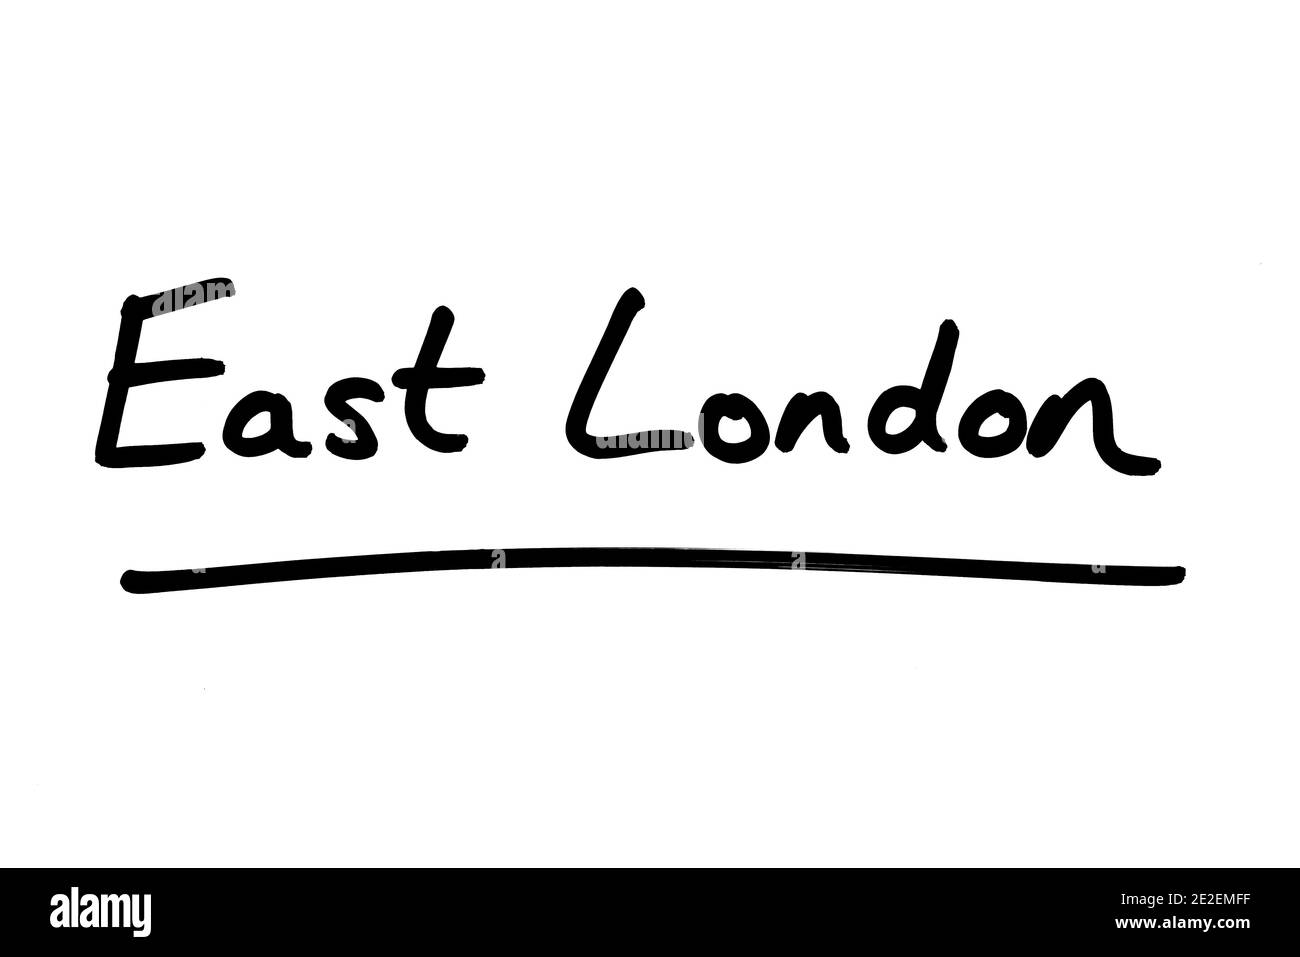 East London, handwritten on a white background. Stock Photo